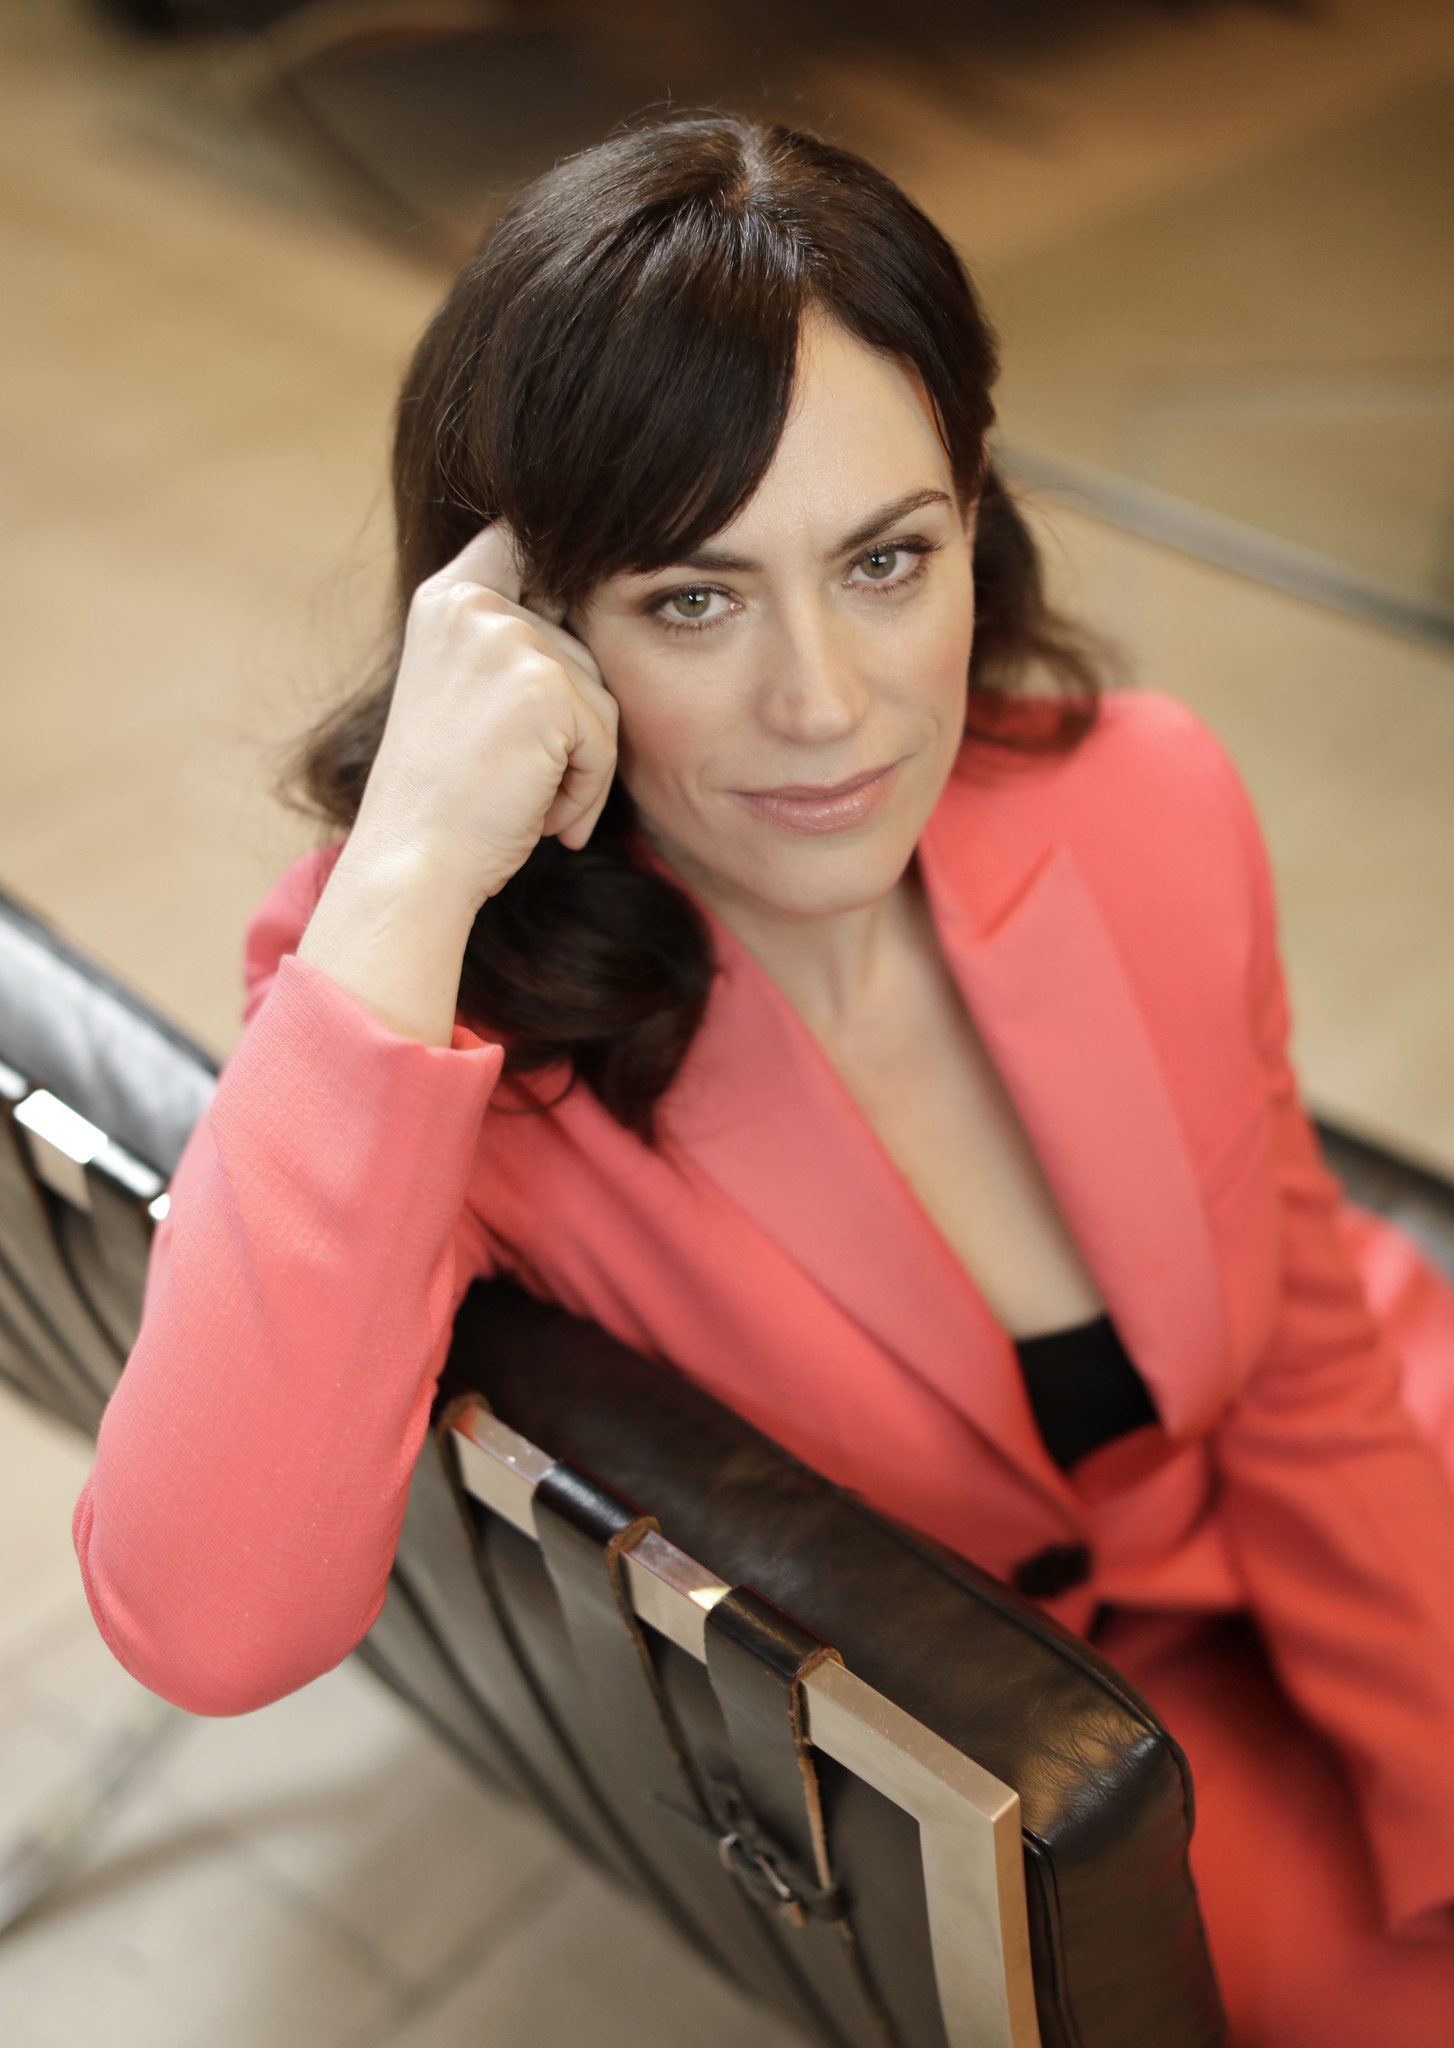 Maggie siff hot